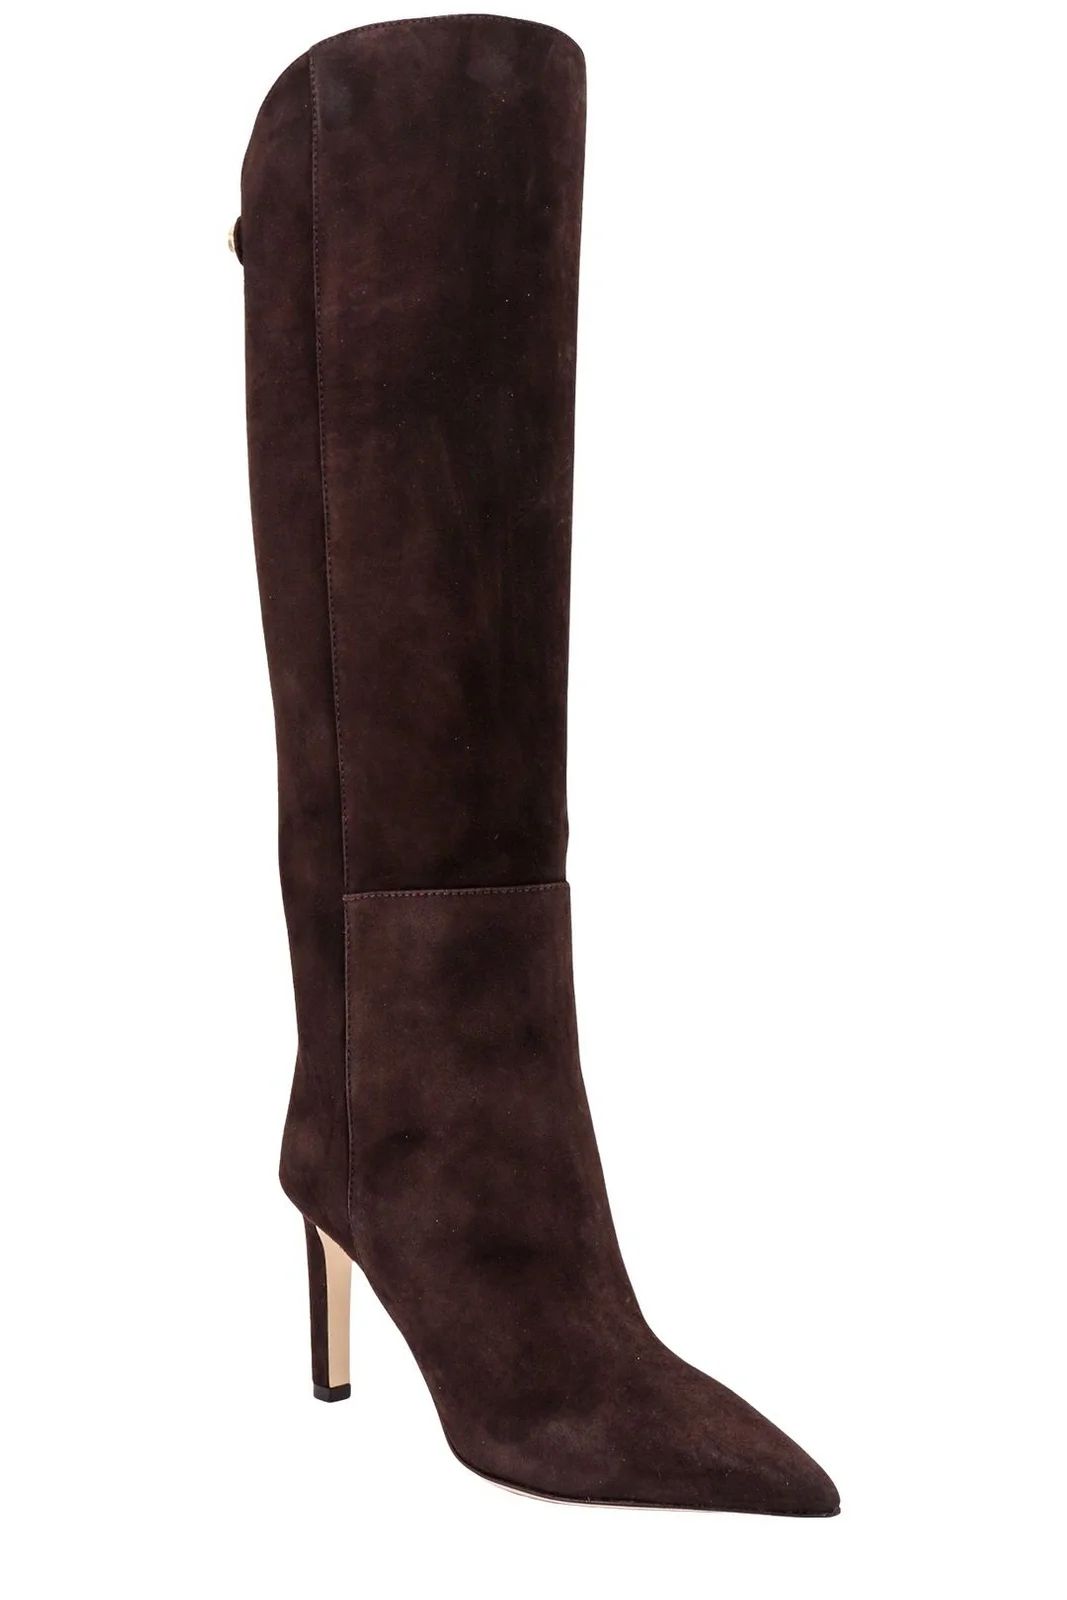 Jimmy Choo Alizze 85 Pointed-Toe Boots | Cettire Global